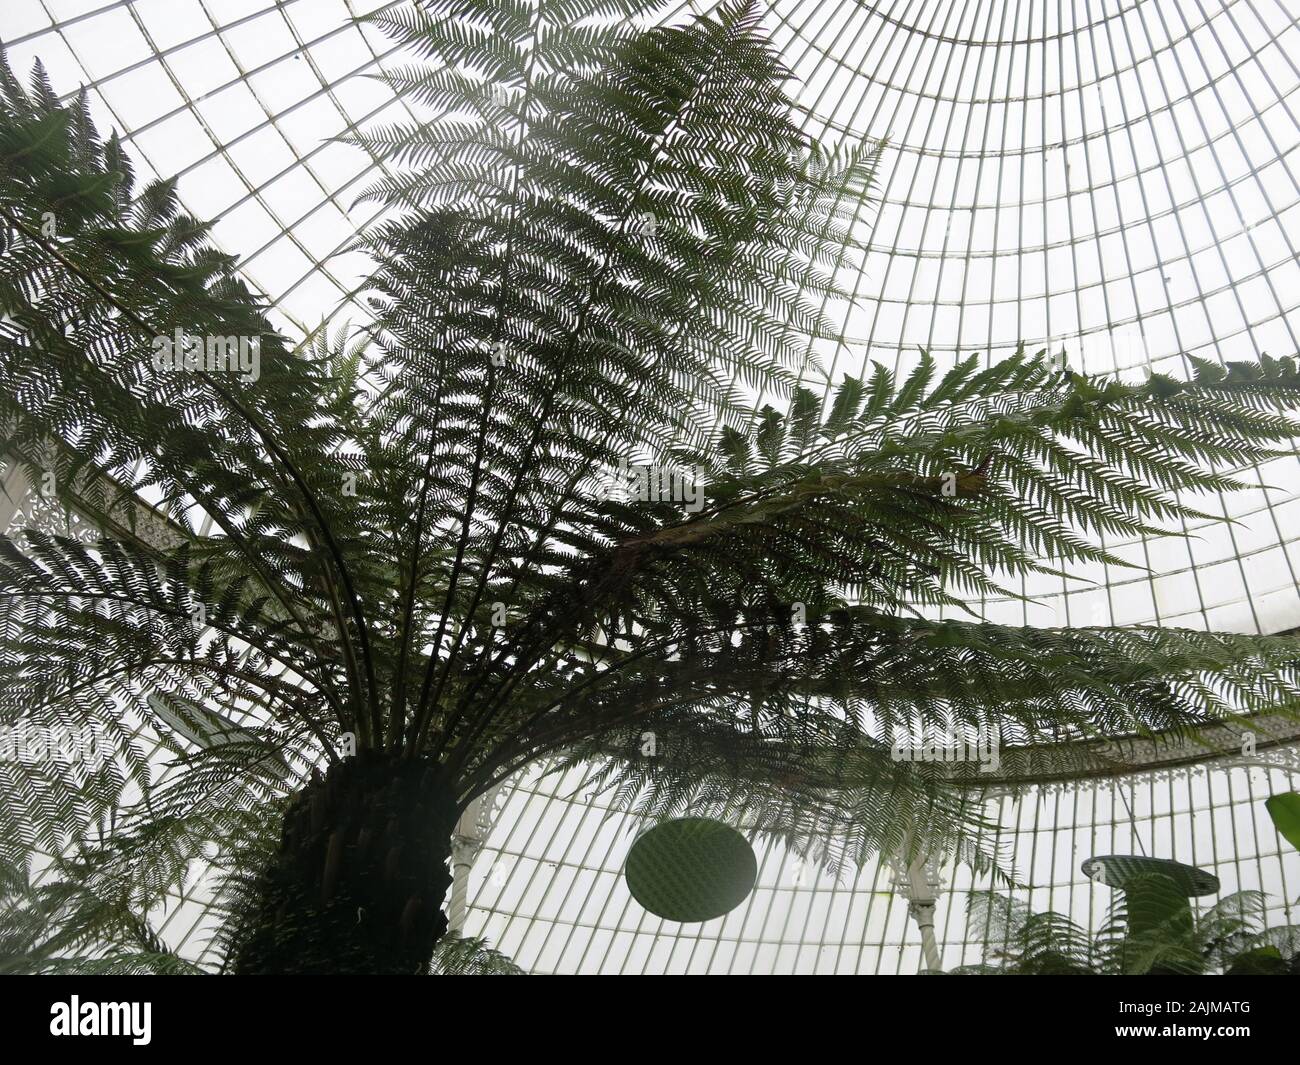 A majestic tree fern, Cyatheales, with its lacy fronds silhouetted against the concentric circles in the domed ceiling of a botanical glasshouse. Stock Photo